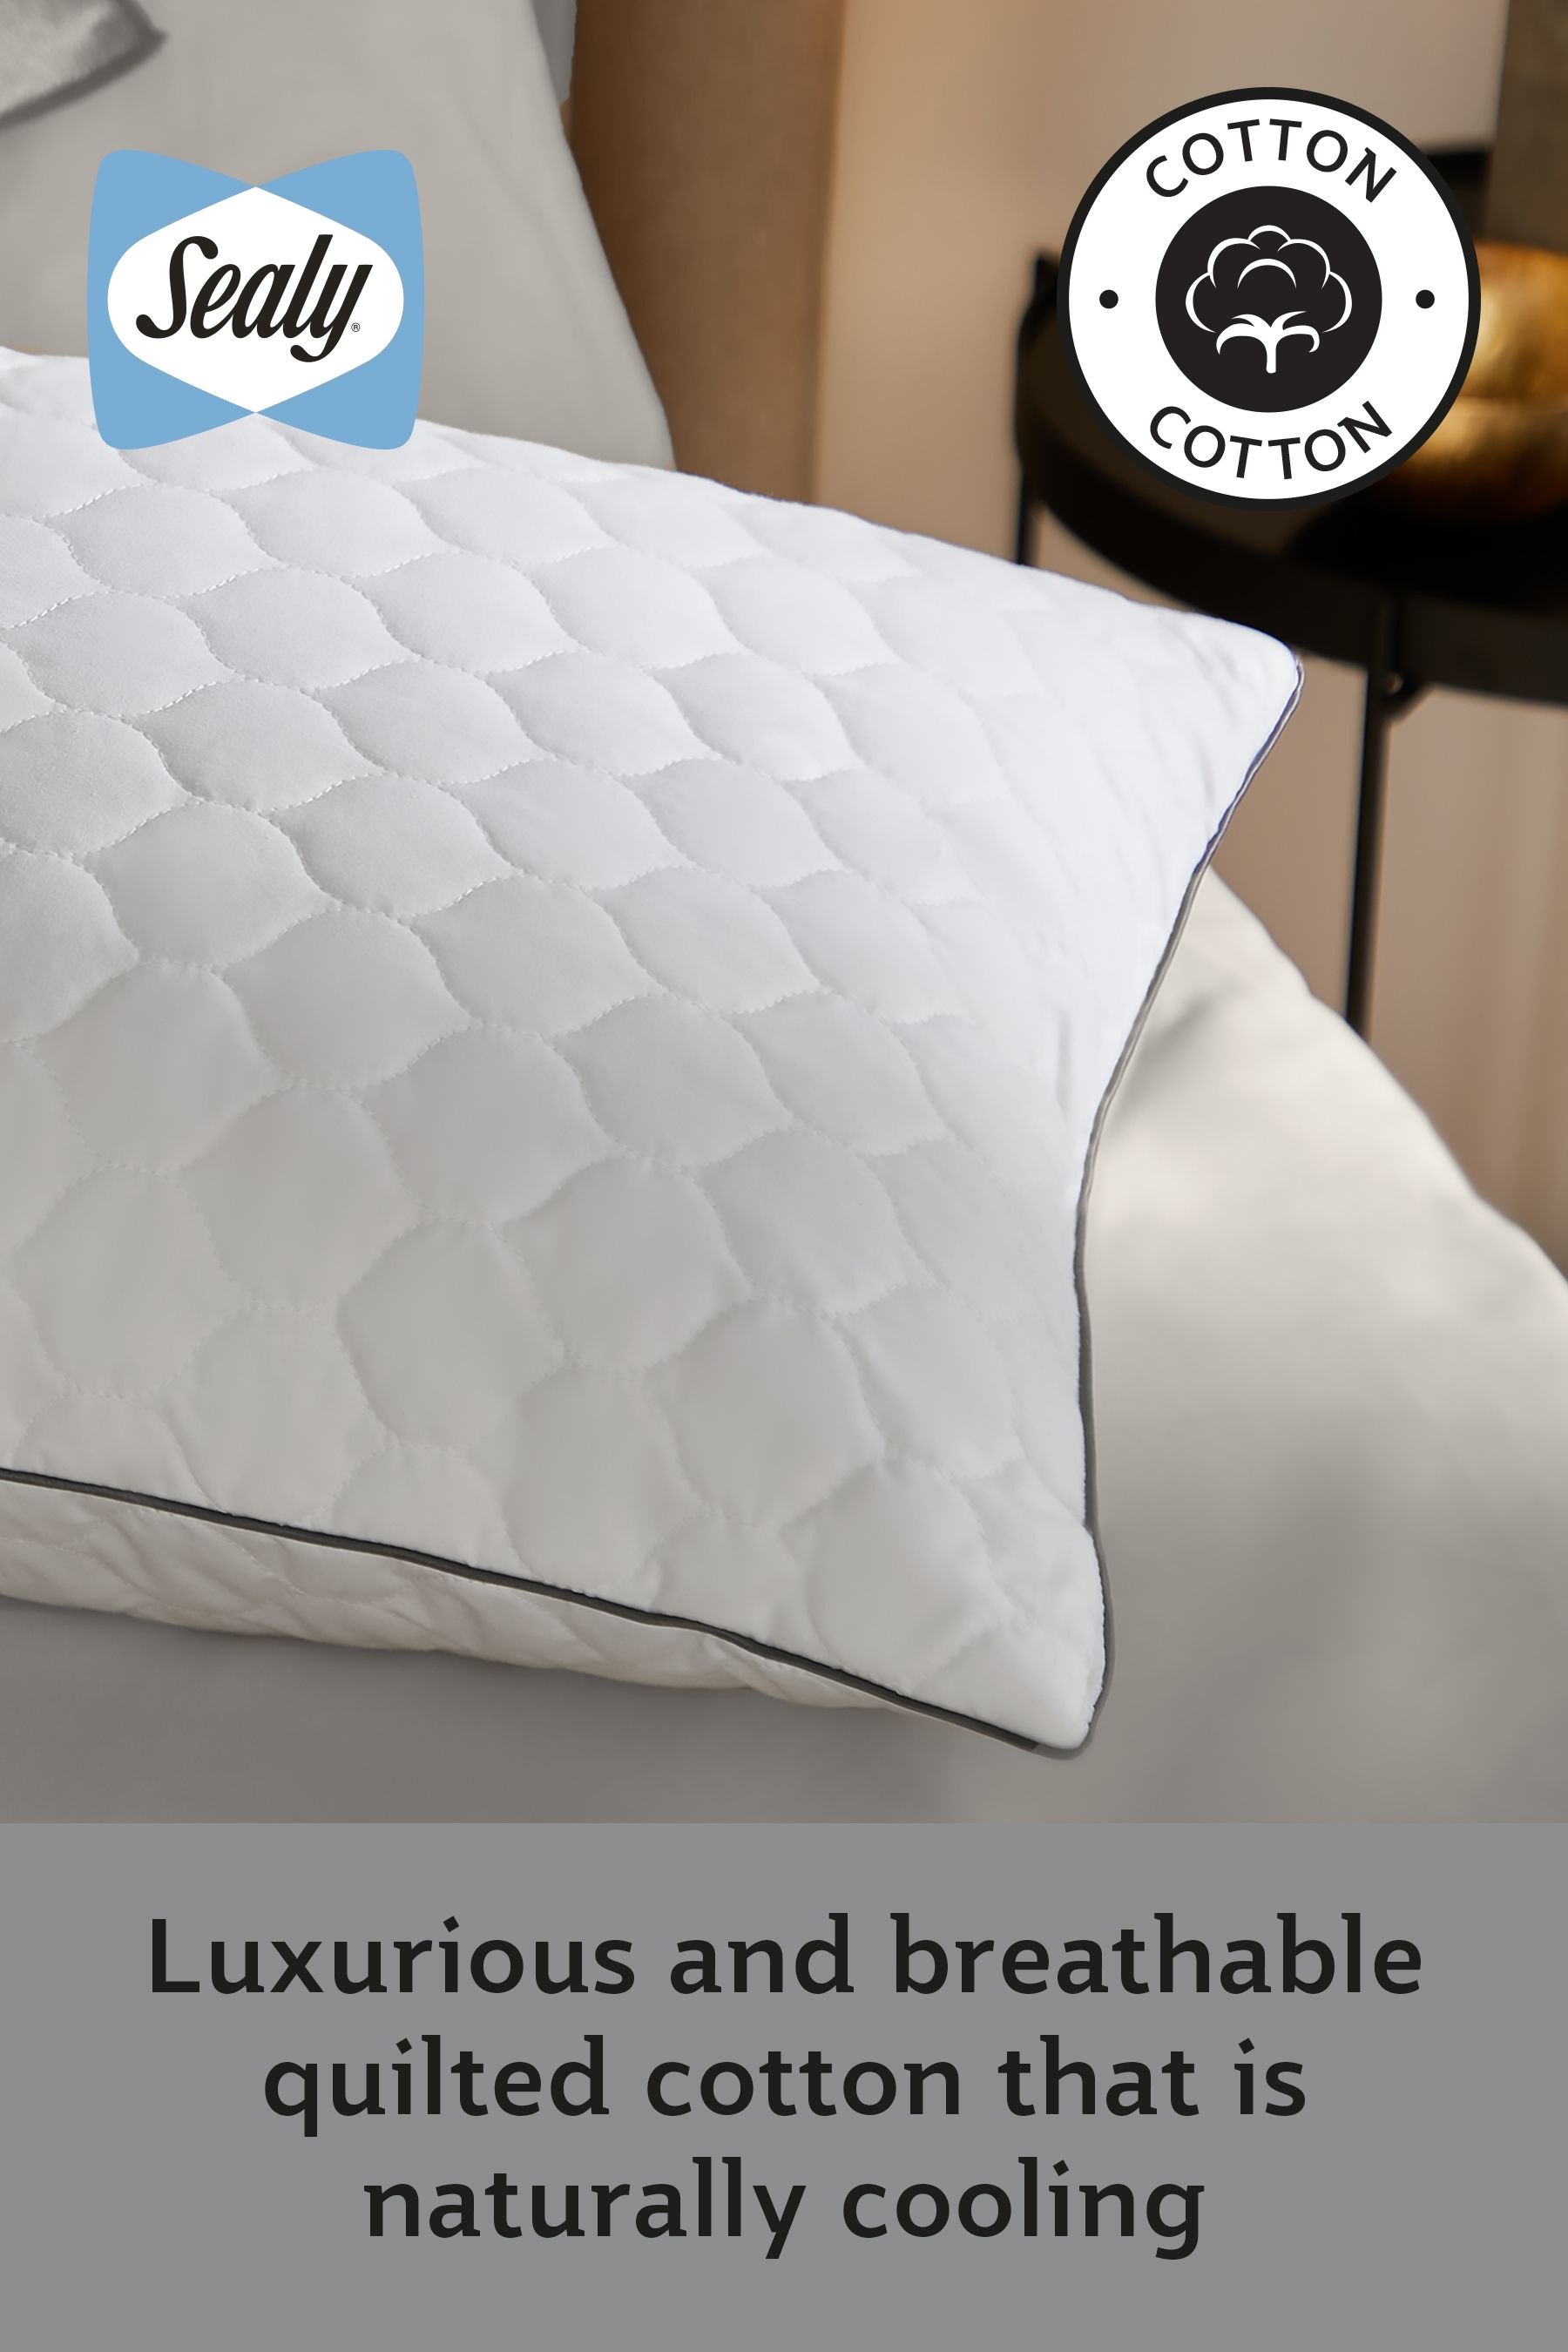 Buy Sealy Deeply Full Pillow from the Next UK online shop